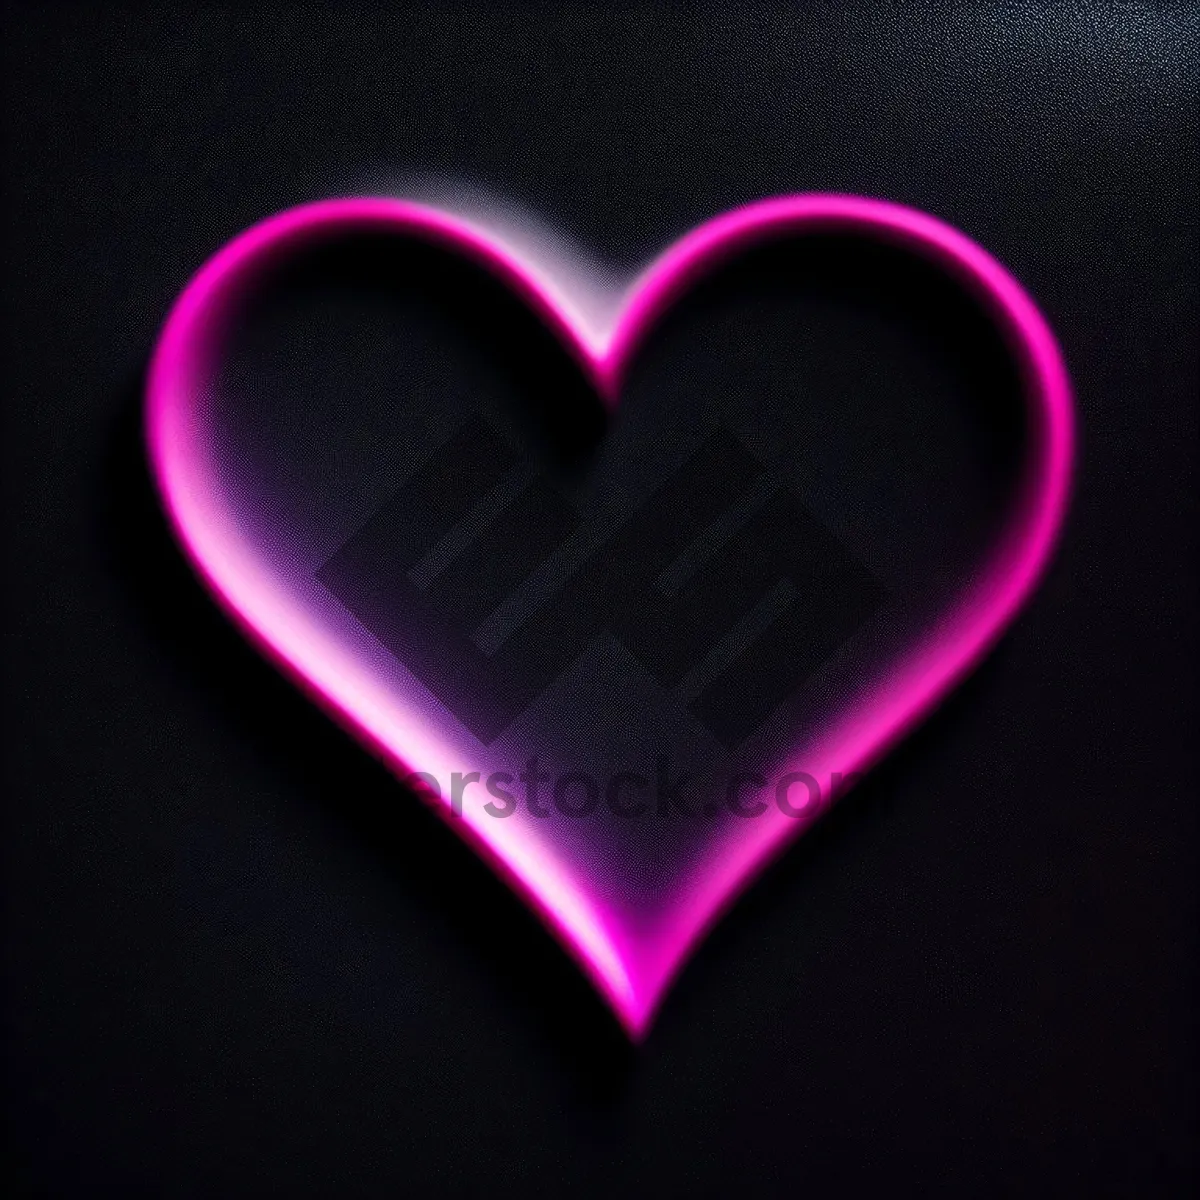 Picture of Passionate Hearts: A Romantic Valentine's Day Art"
or
"Loving Symbol: Heart-shaped Valentine's Day Graphics